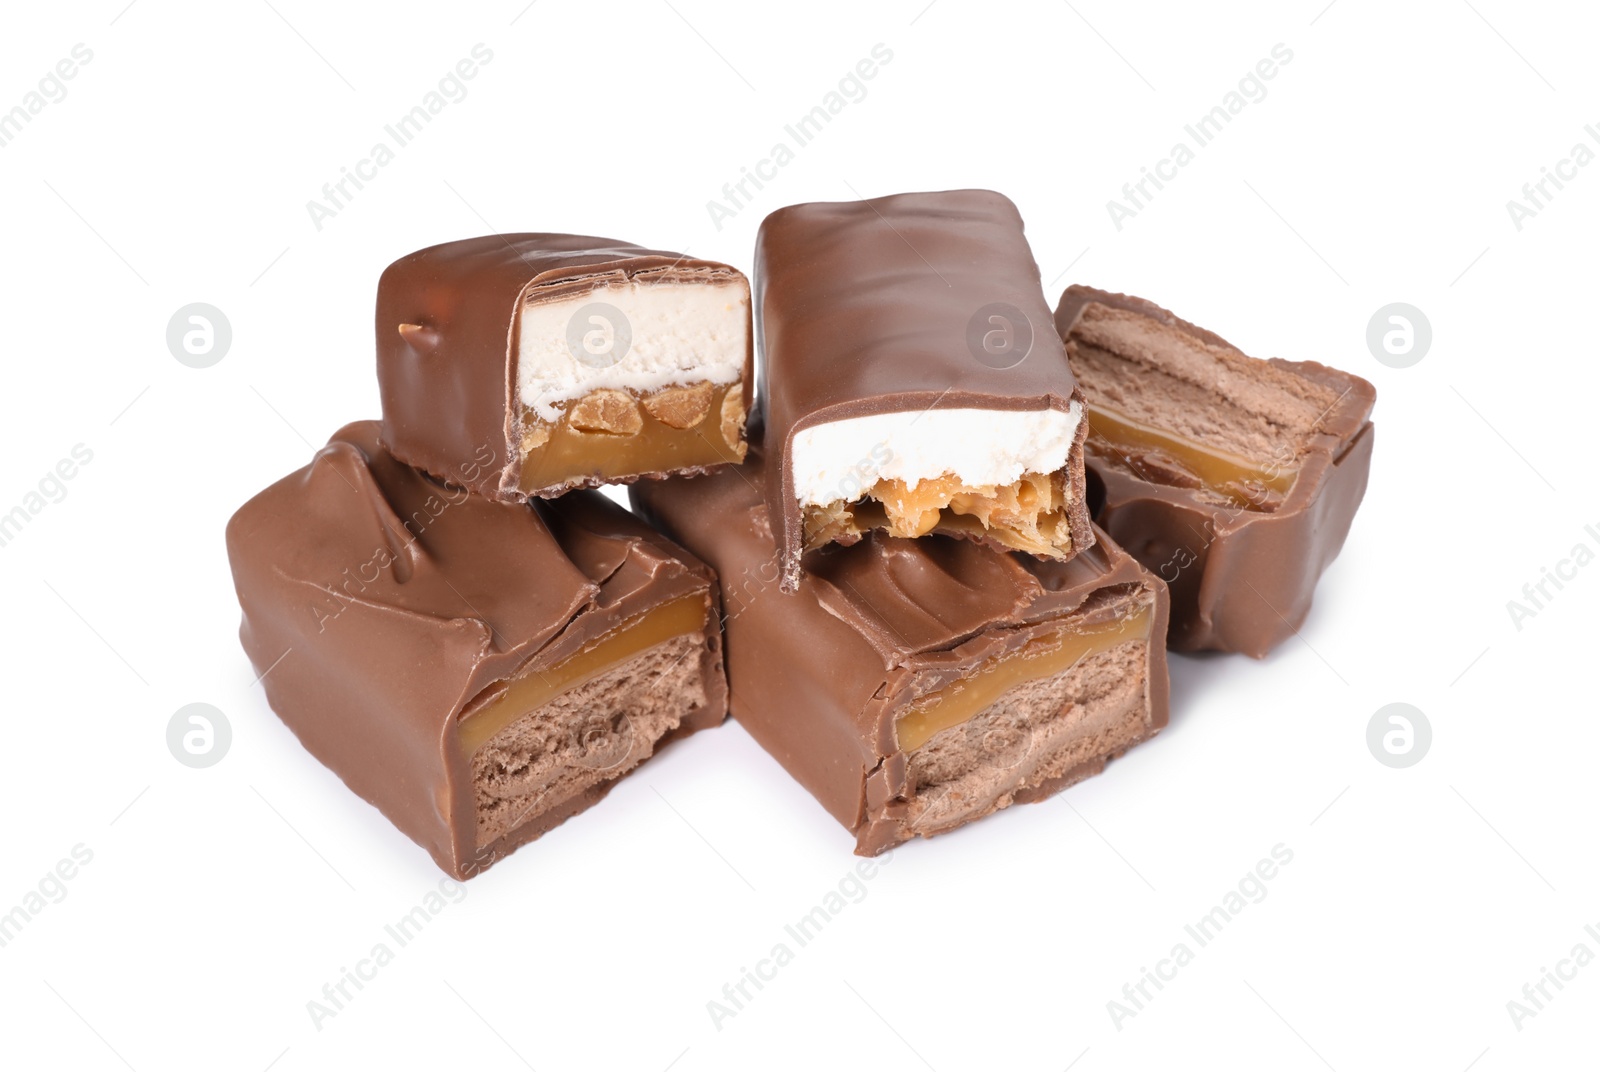 Photo of Pieces of tasty chocolate bars with nougat and nuts on white background